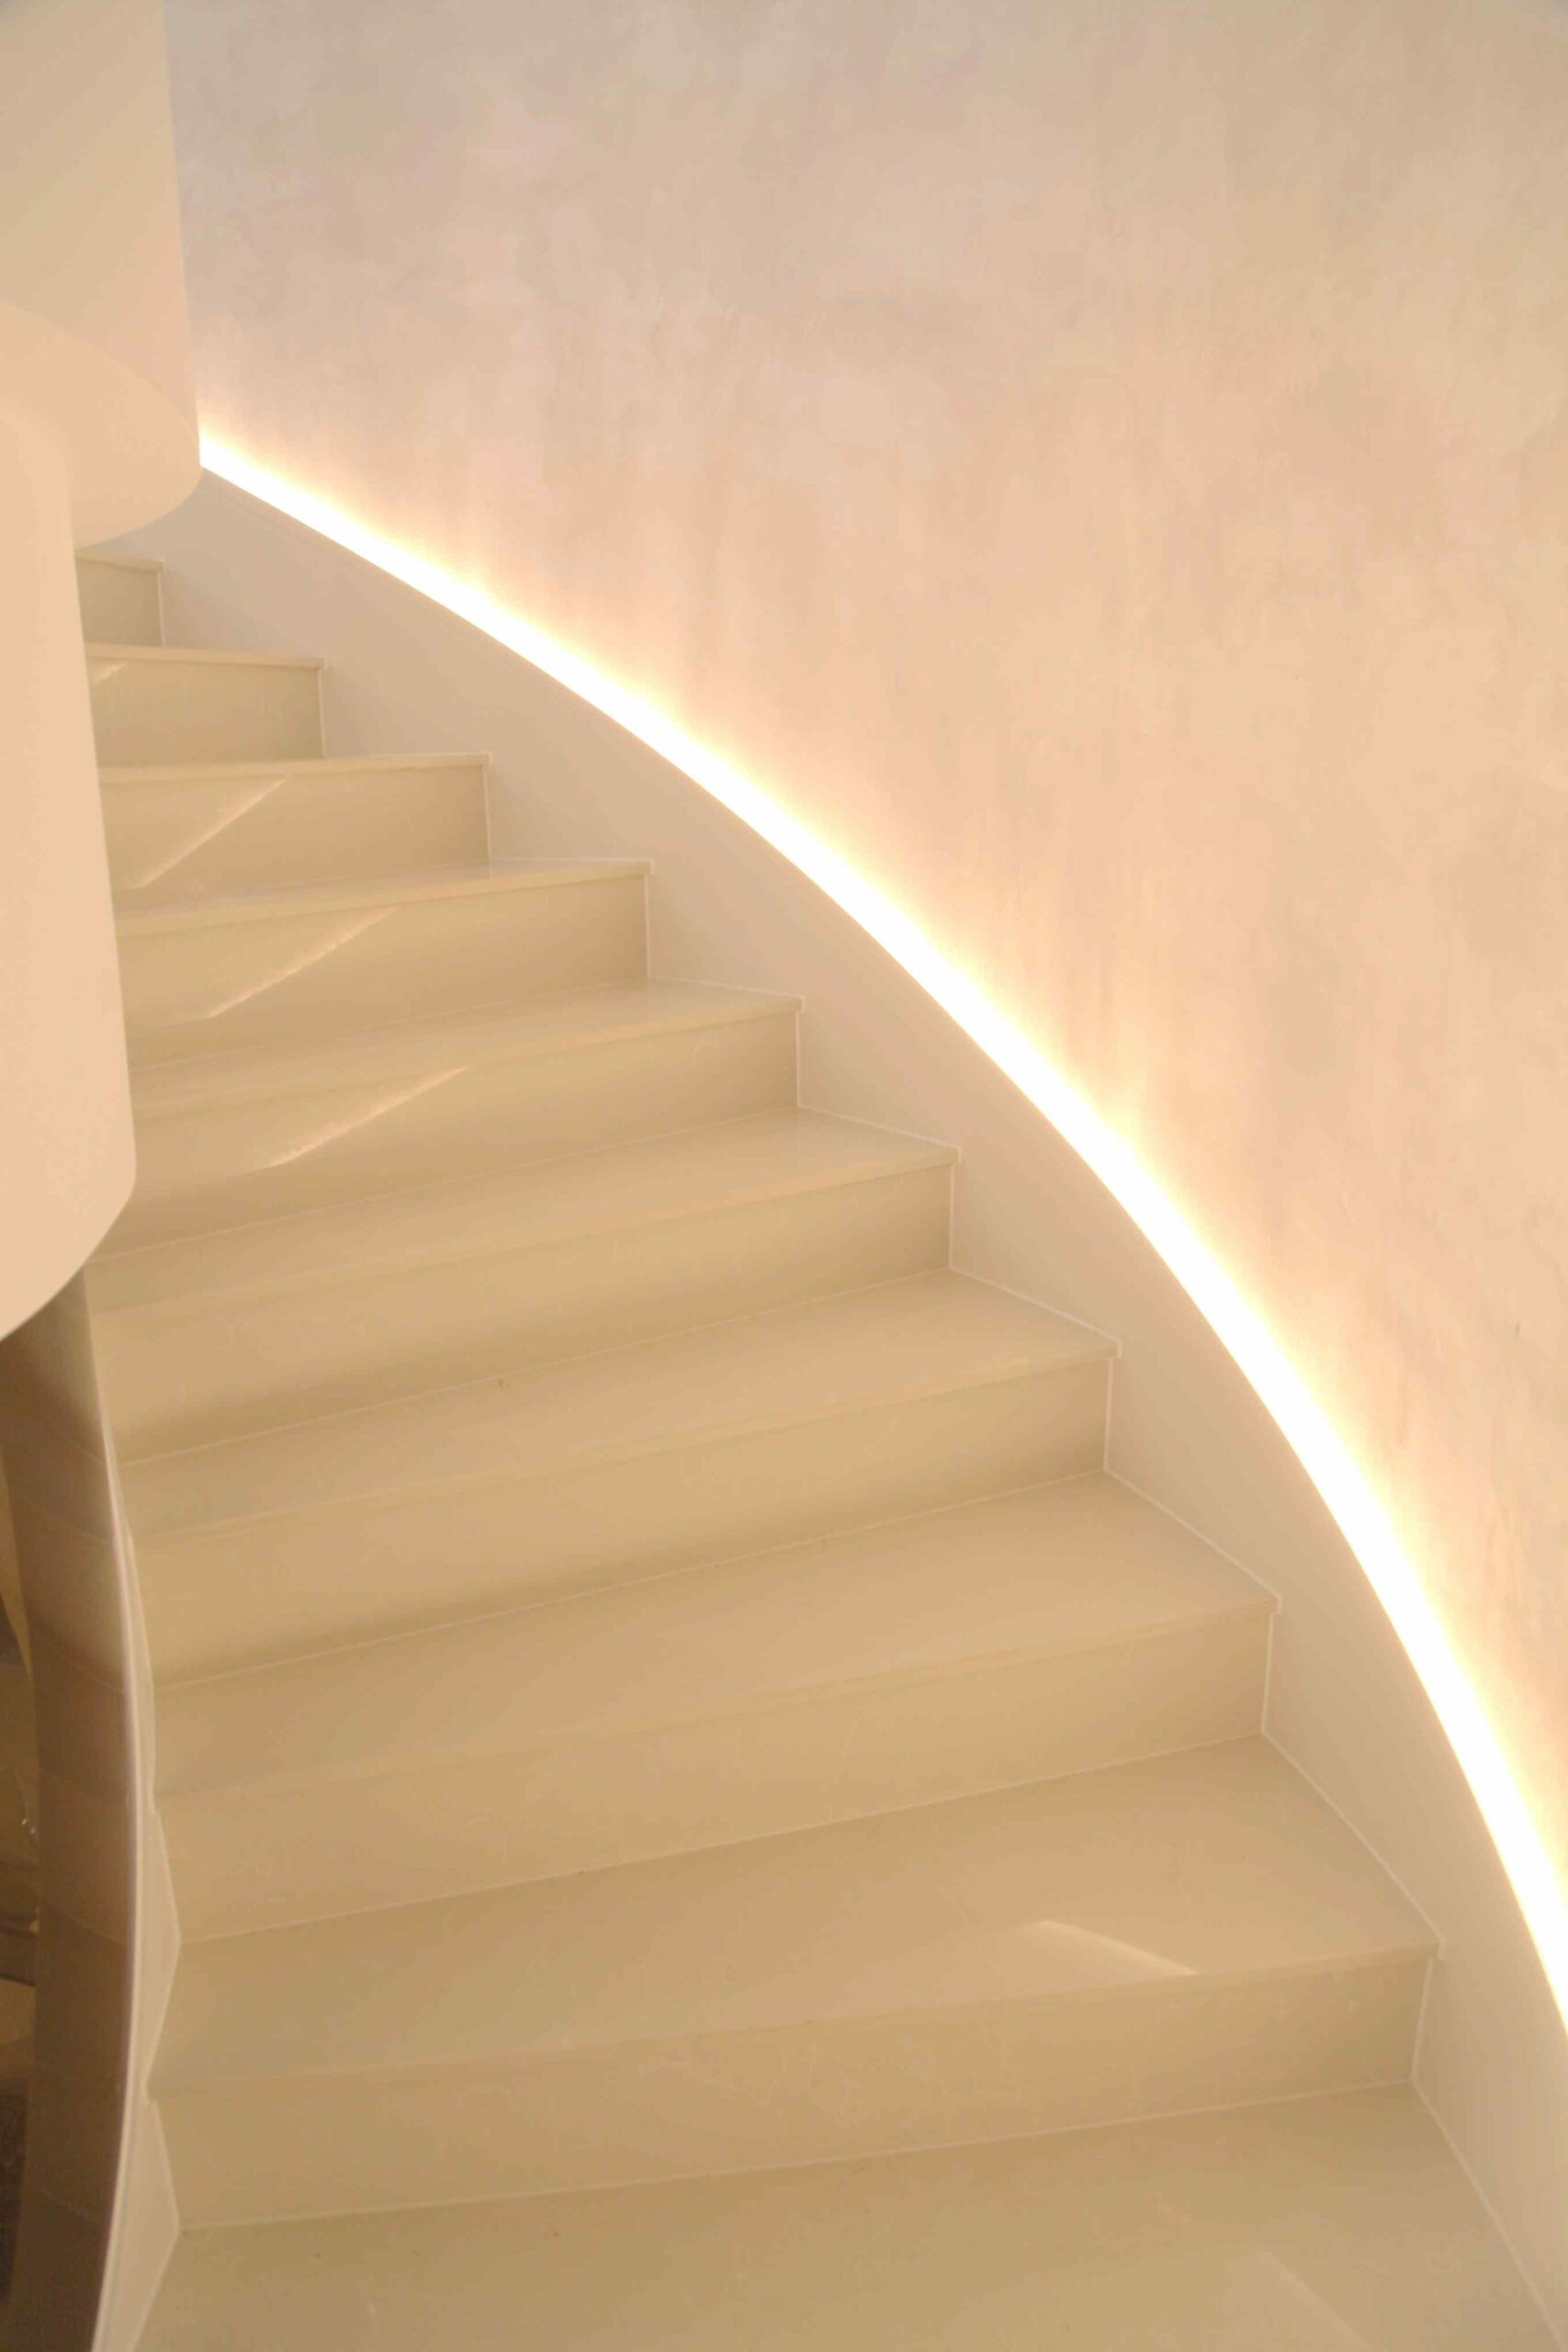 Led lights on the side of a helical staircase